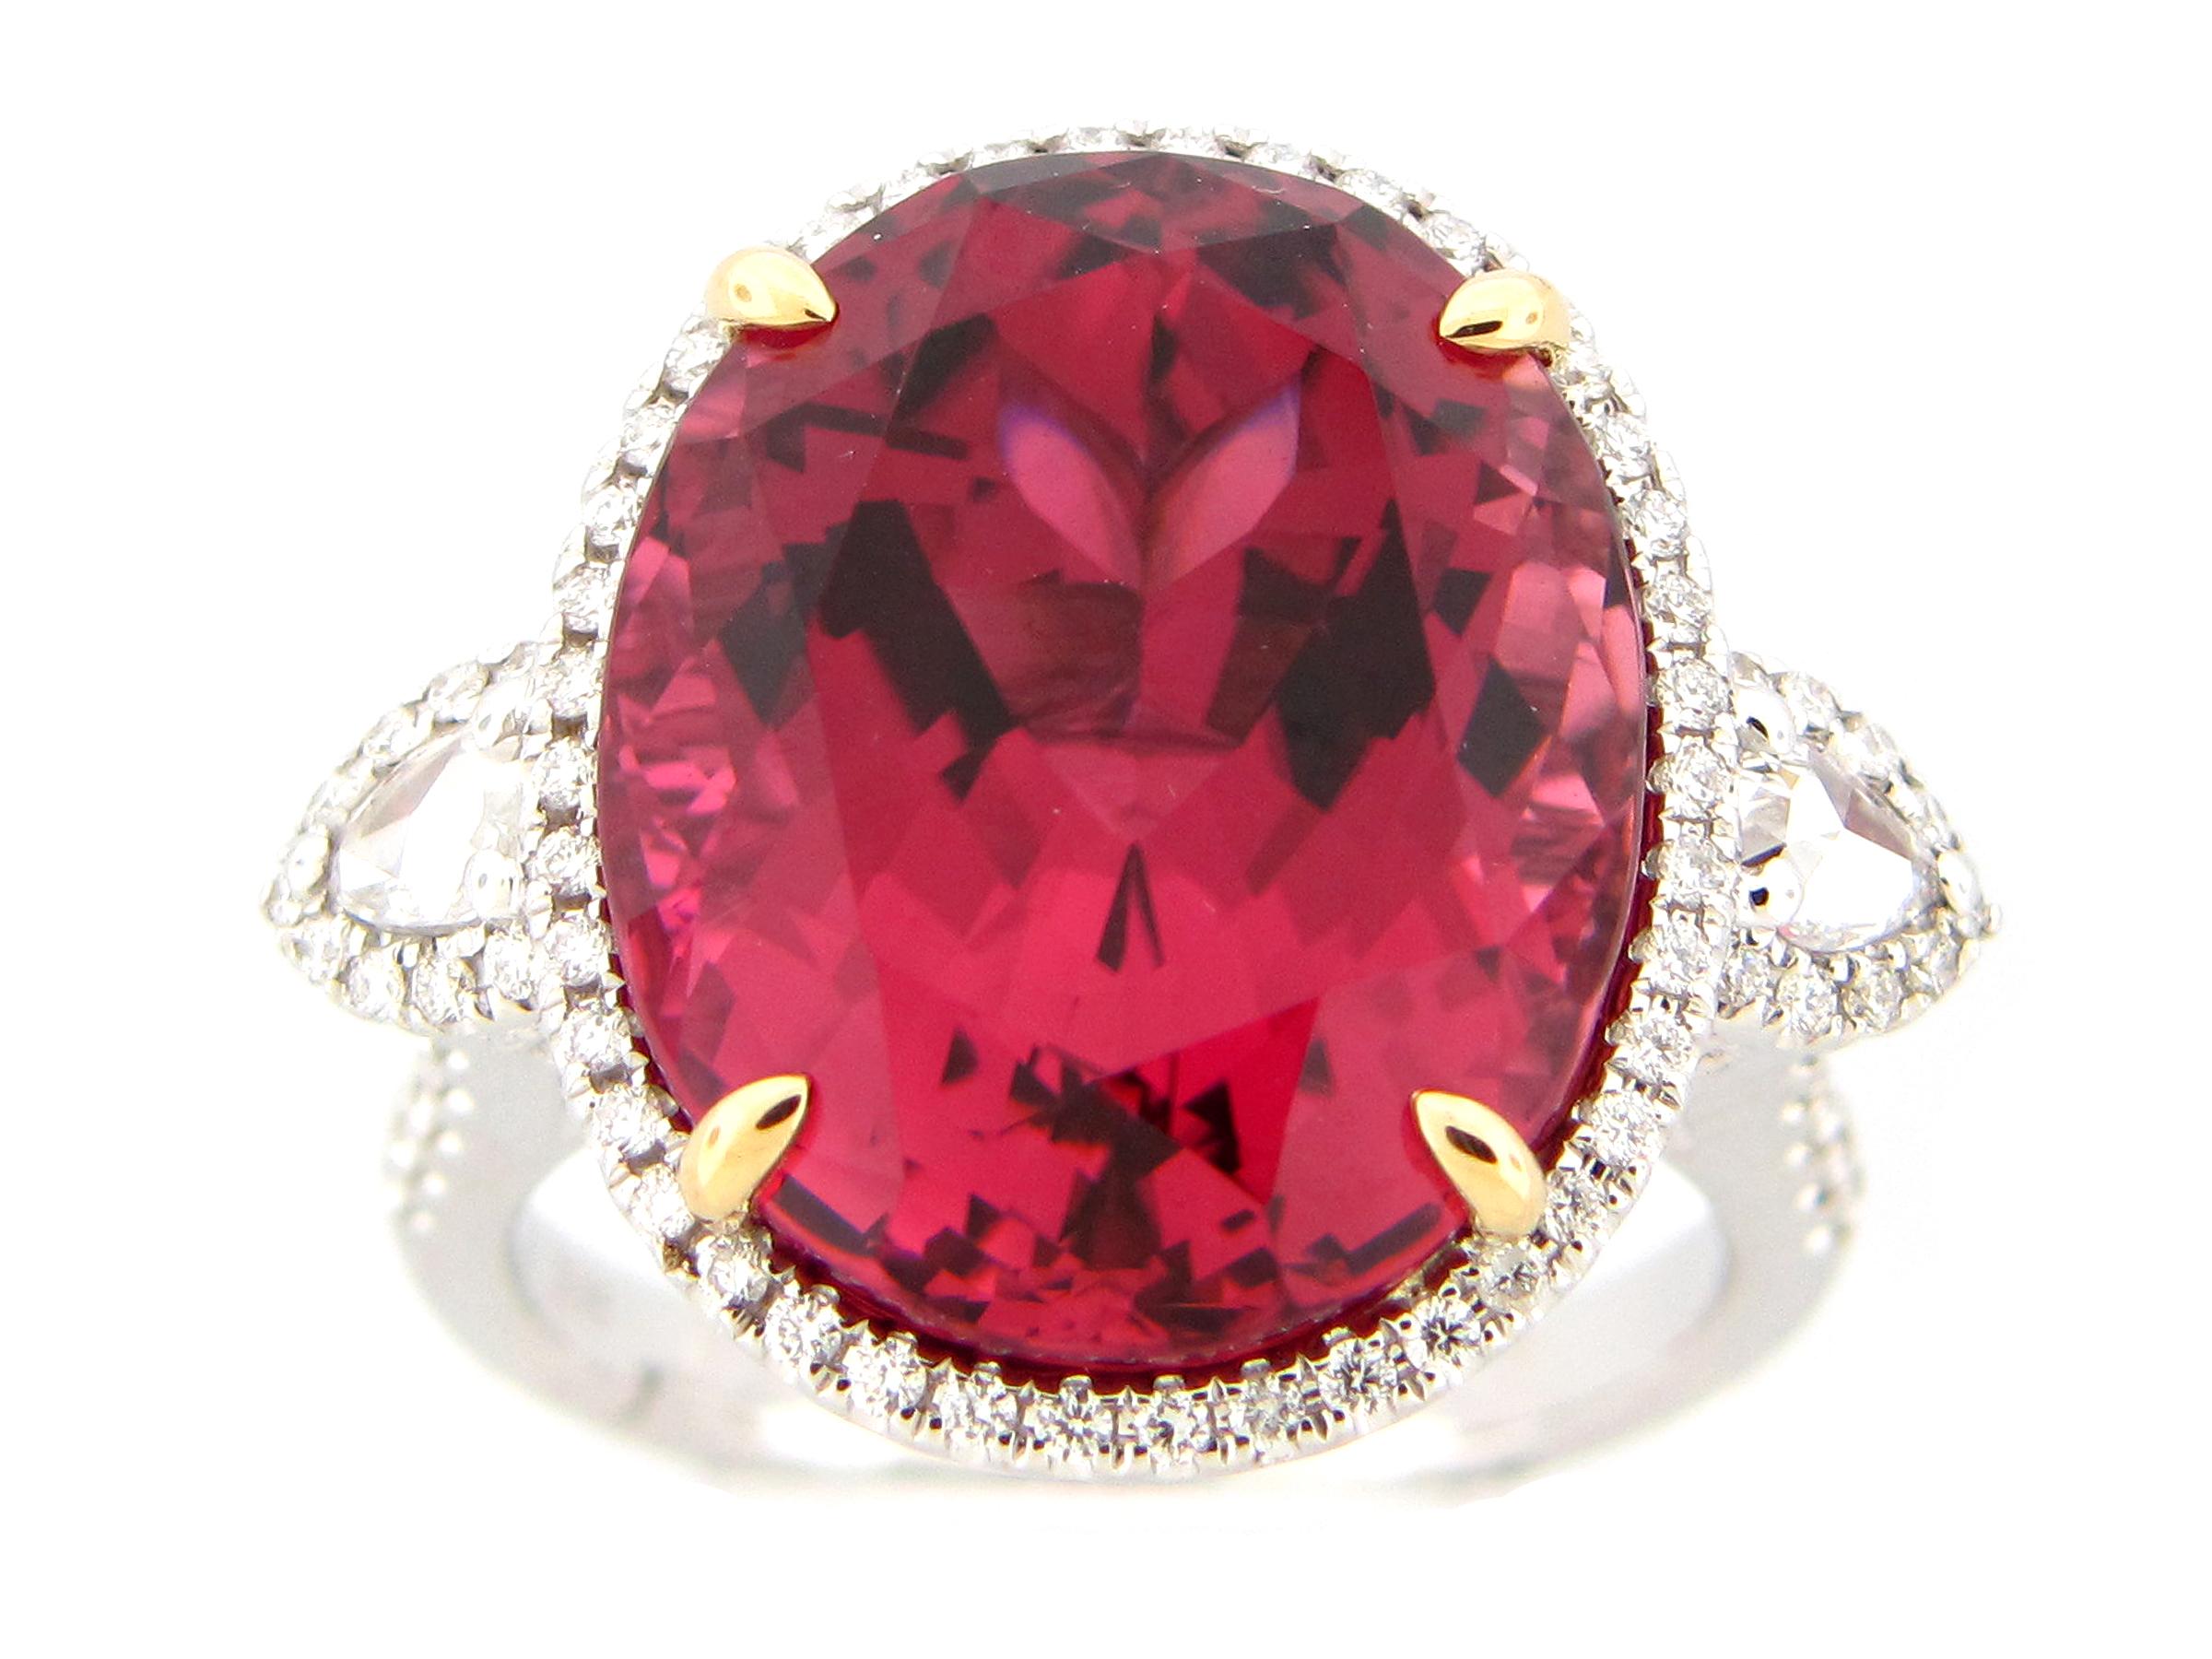 Women's 15.65 Carat Oval Rubellite Tourmaline and Diamond Cocktail Ring